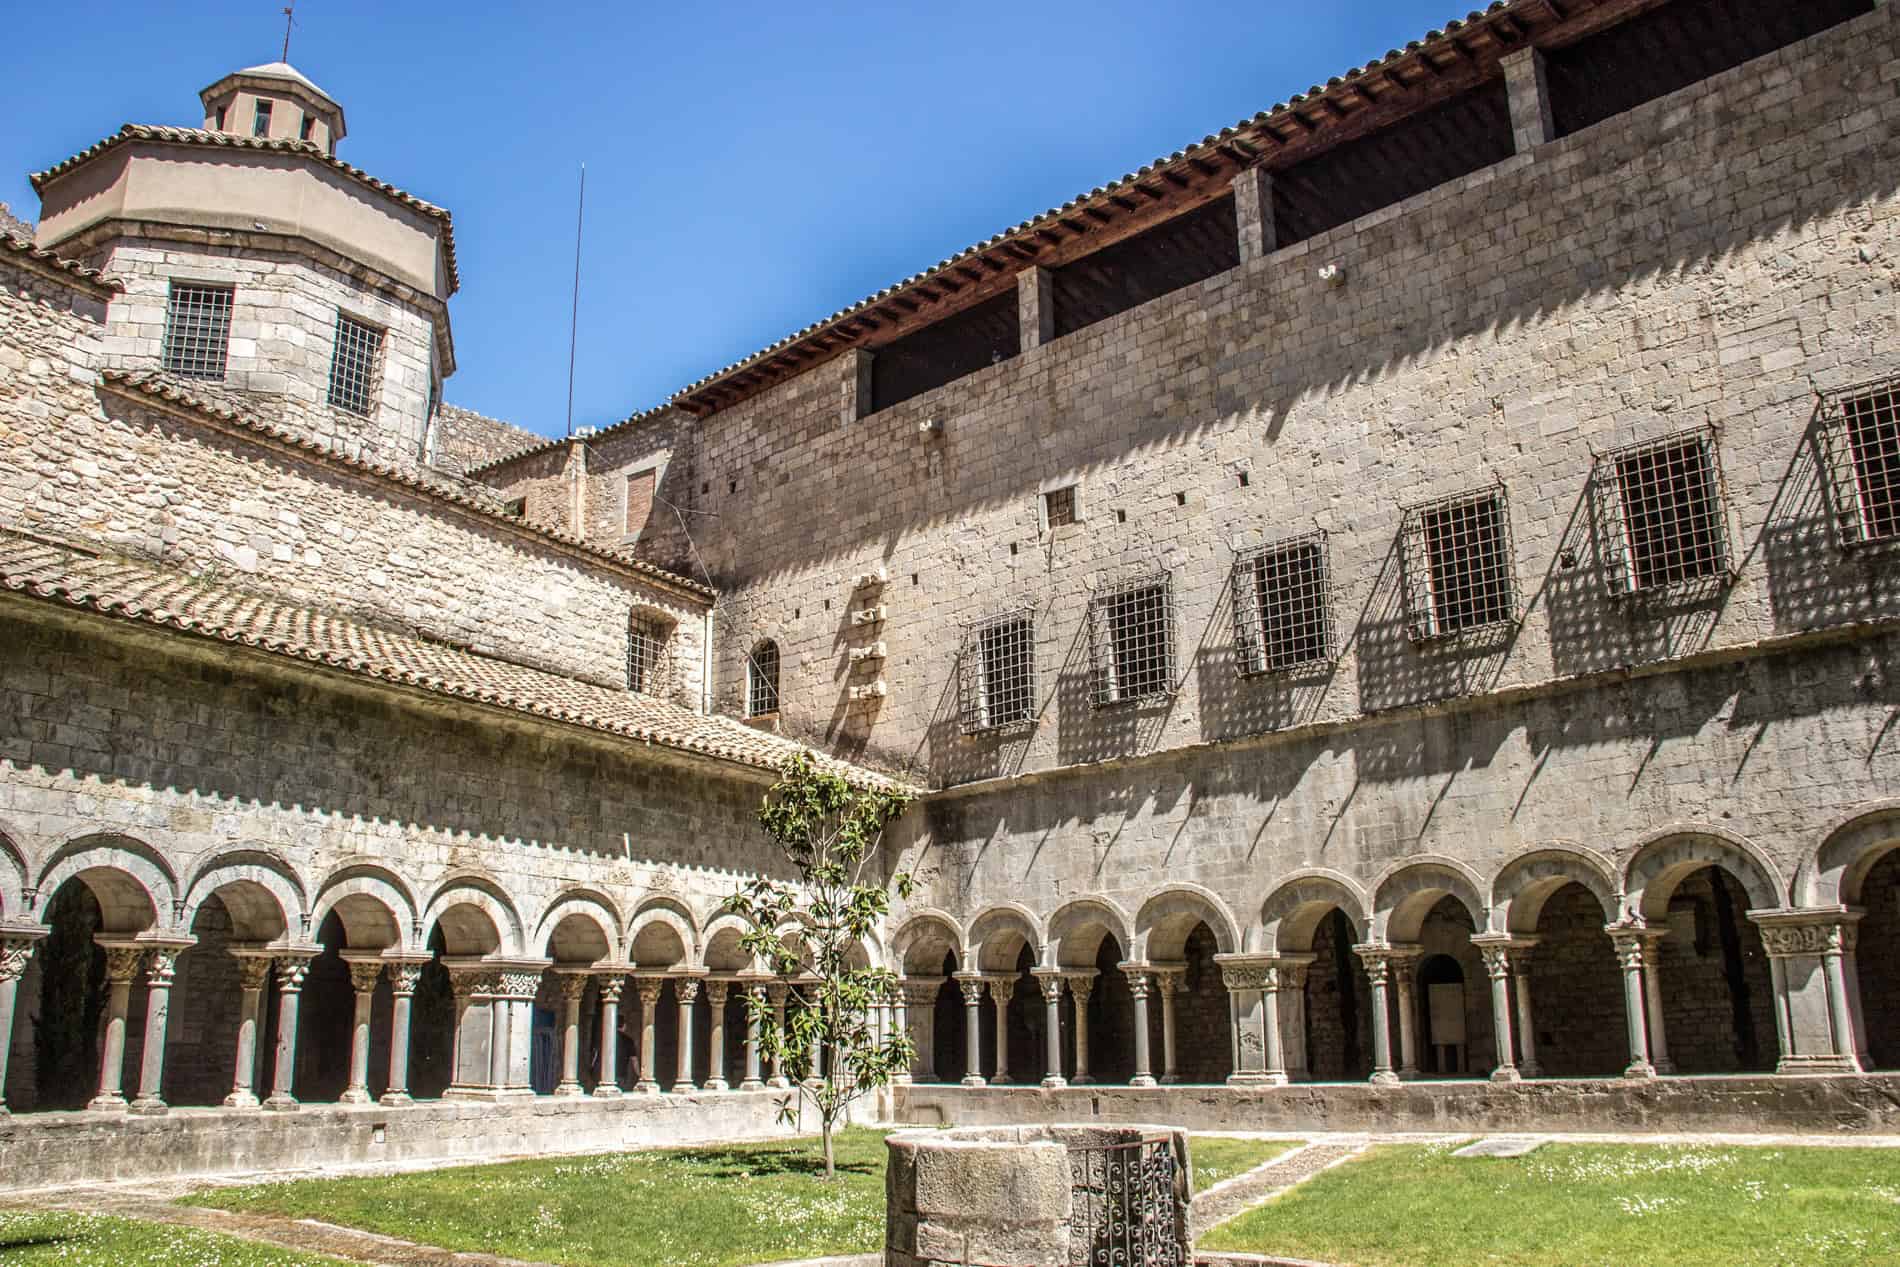 View to the green lawn courtyard of an old stone, arched Arab Bath complex in Girona. 